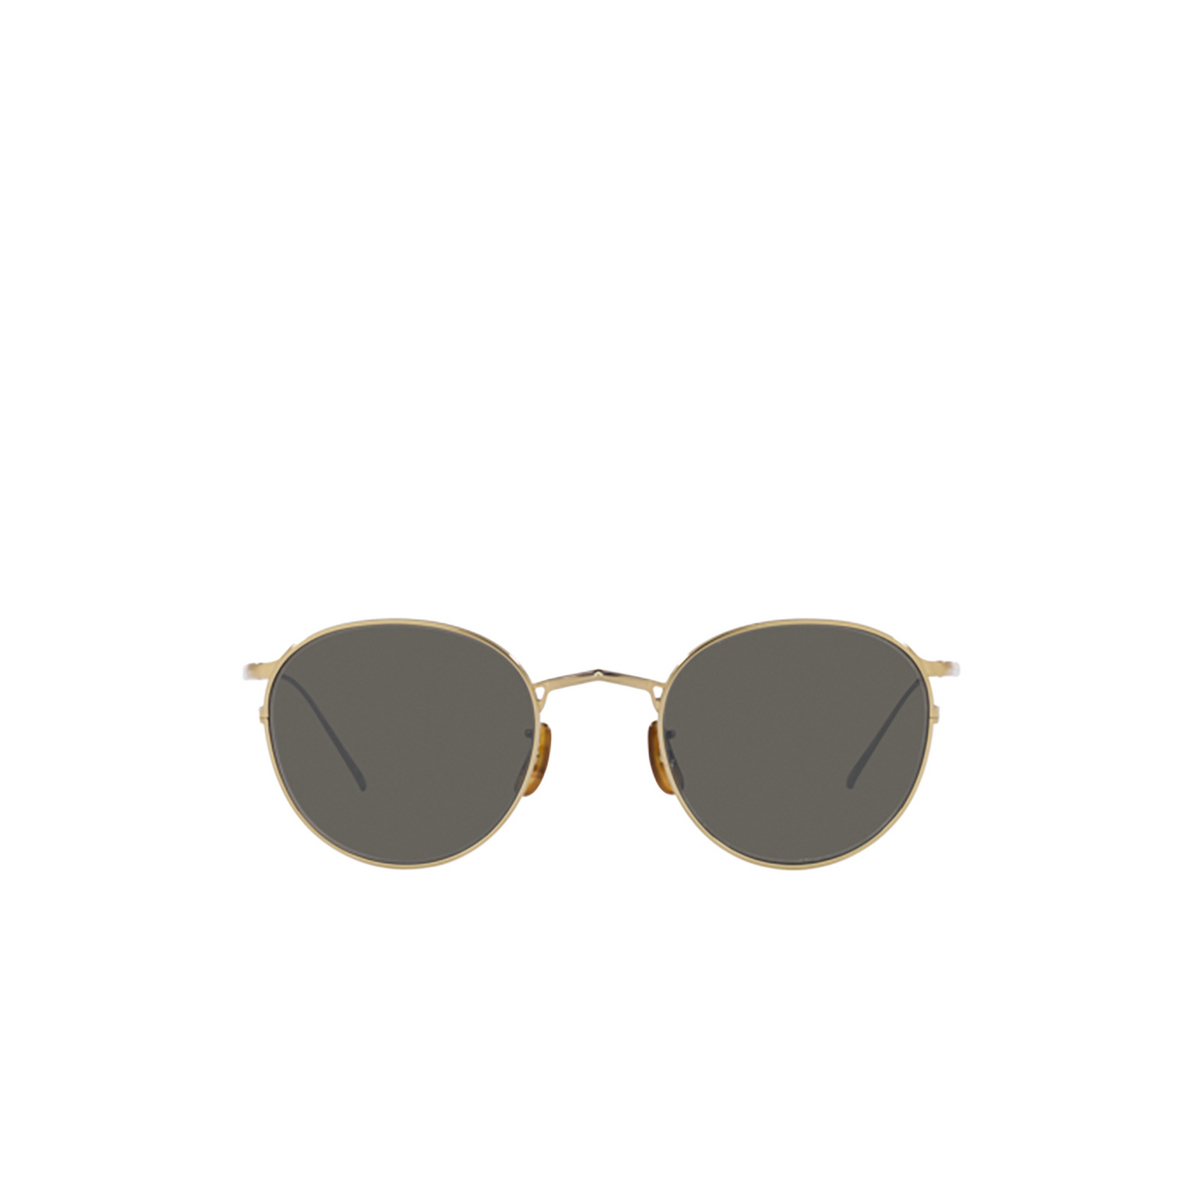 Oliver Peoples G. PONTI-4 Sunglasses 5035R5 Soft Gold - front view